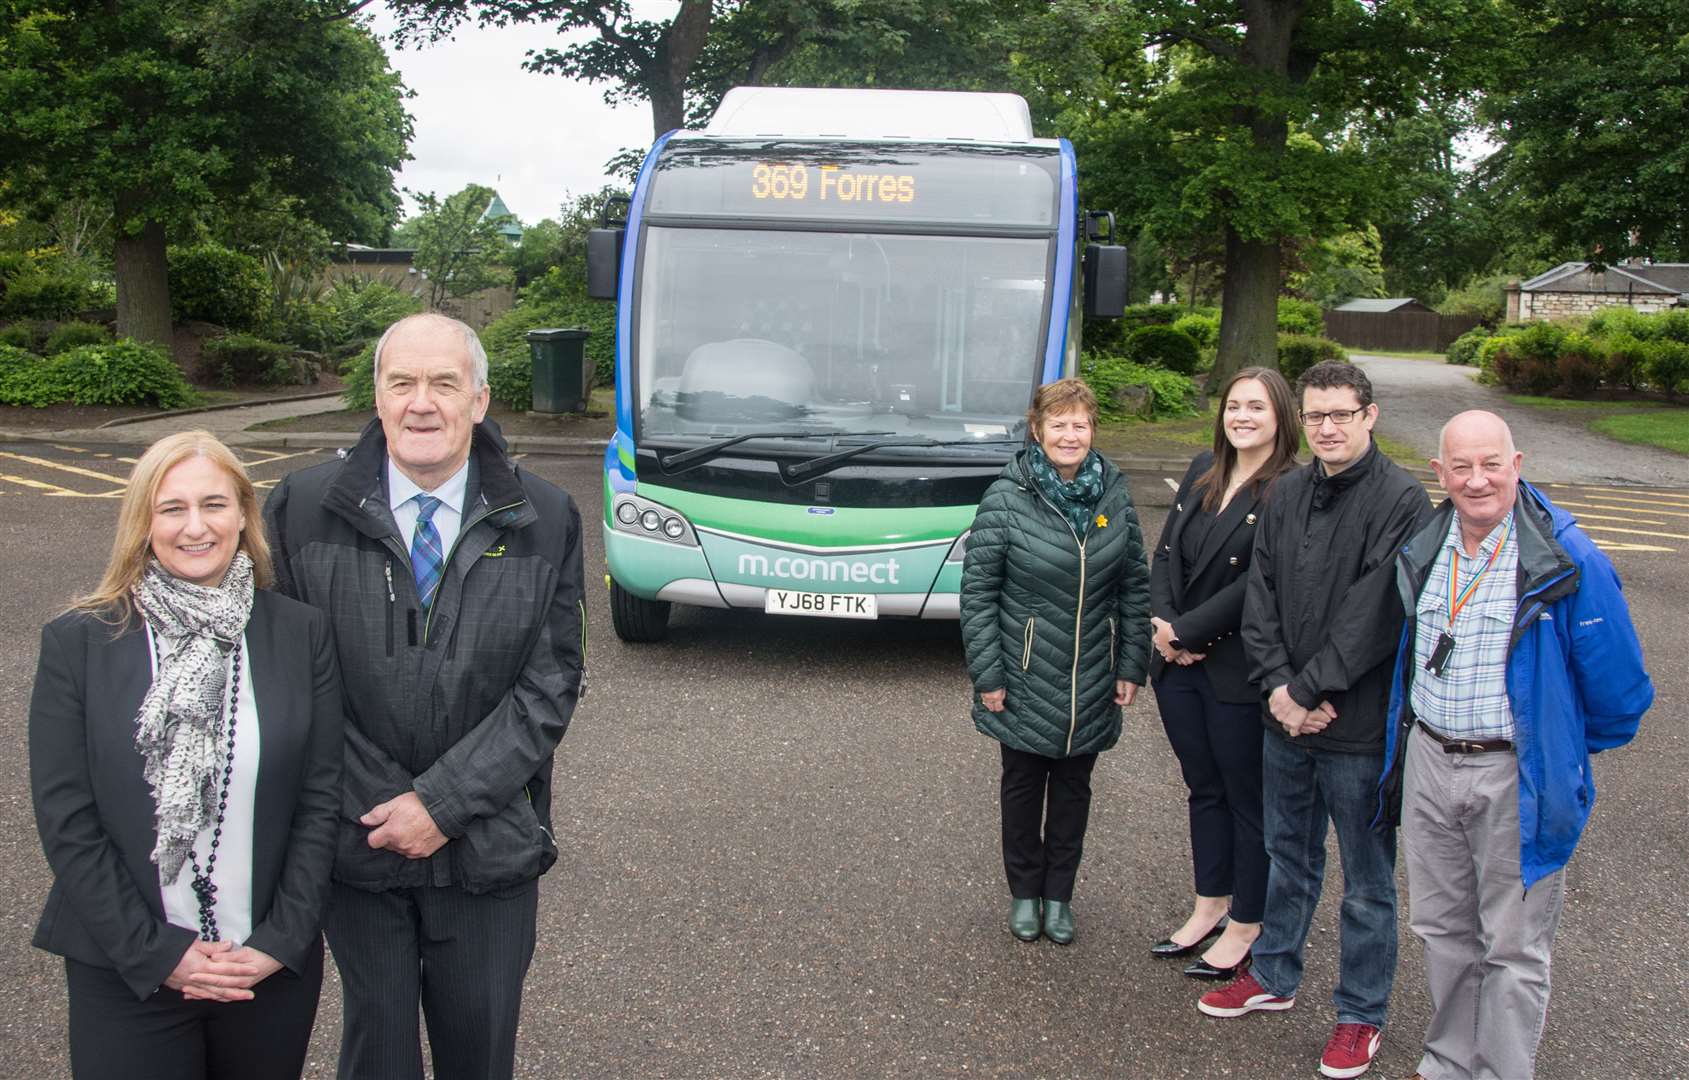 L-R: Julie Cromarty (HiTrans information officer), George Alexander (Forres Councillor), Lorna Creswell (Forres Councillor), Jayne Golding (HiTrans project and policy officer), Aaron McLean (Forres Councillor), Derek Ross (Speyside Councillor)